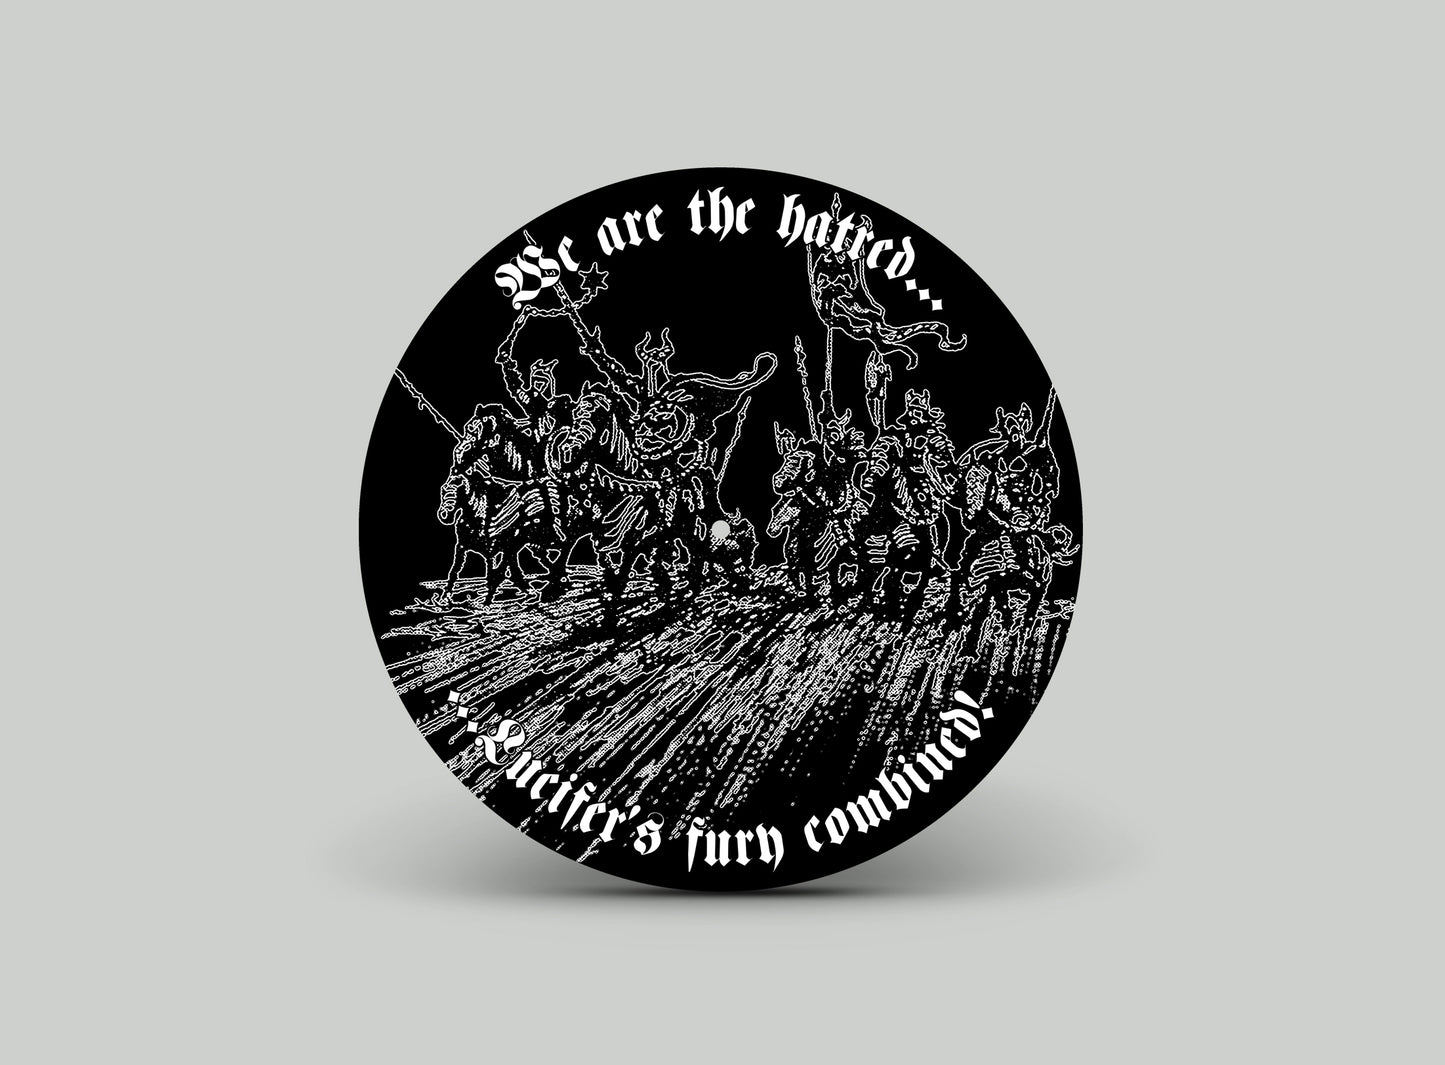 Gospel of the Horns - A Call to Arms picture disc LP gatefold